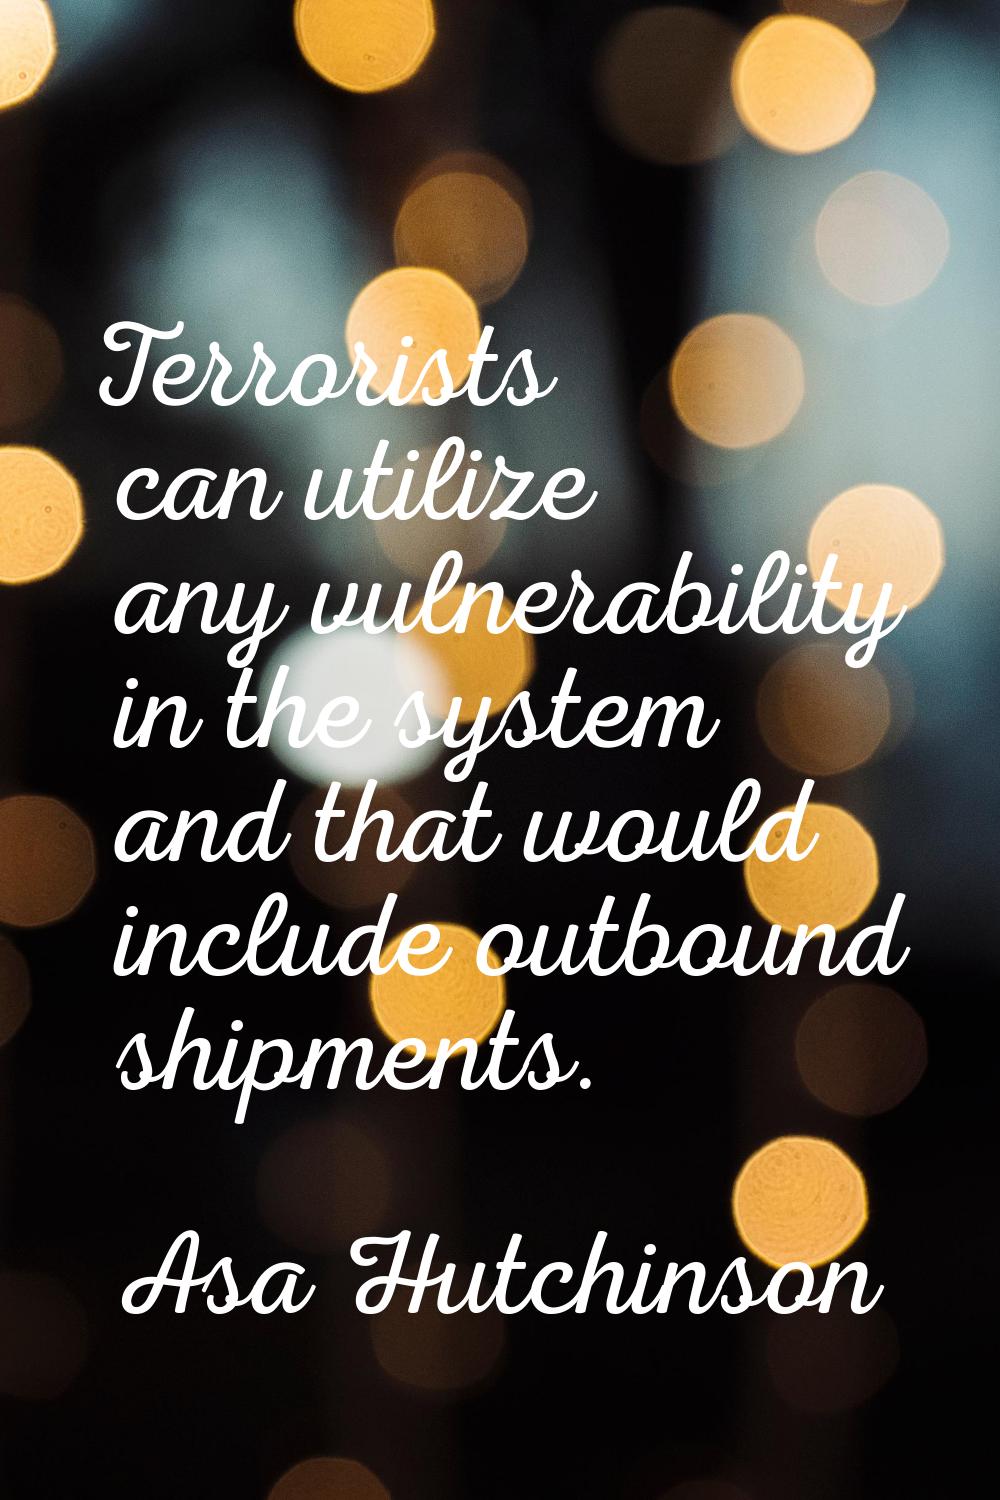 Terrorists can utilize any vulnerability in the system and that would include outbound shipments.